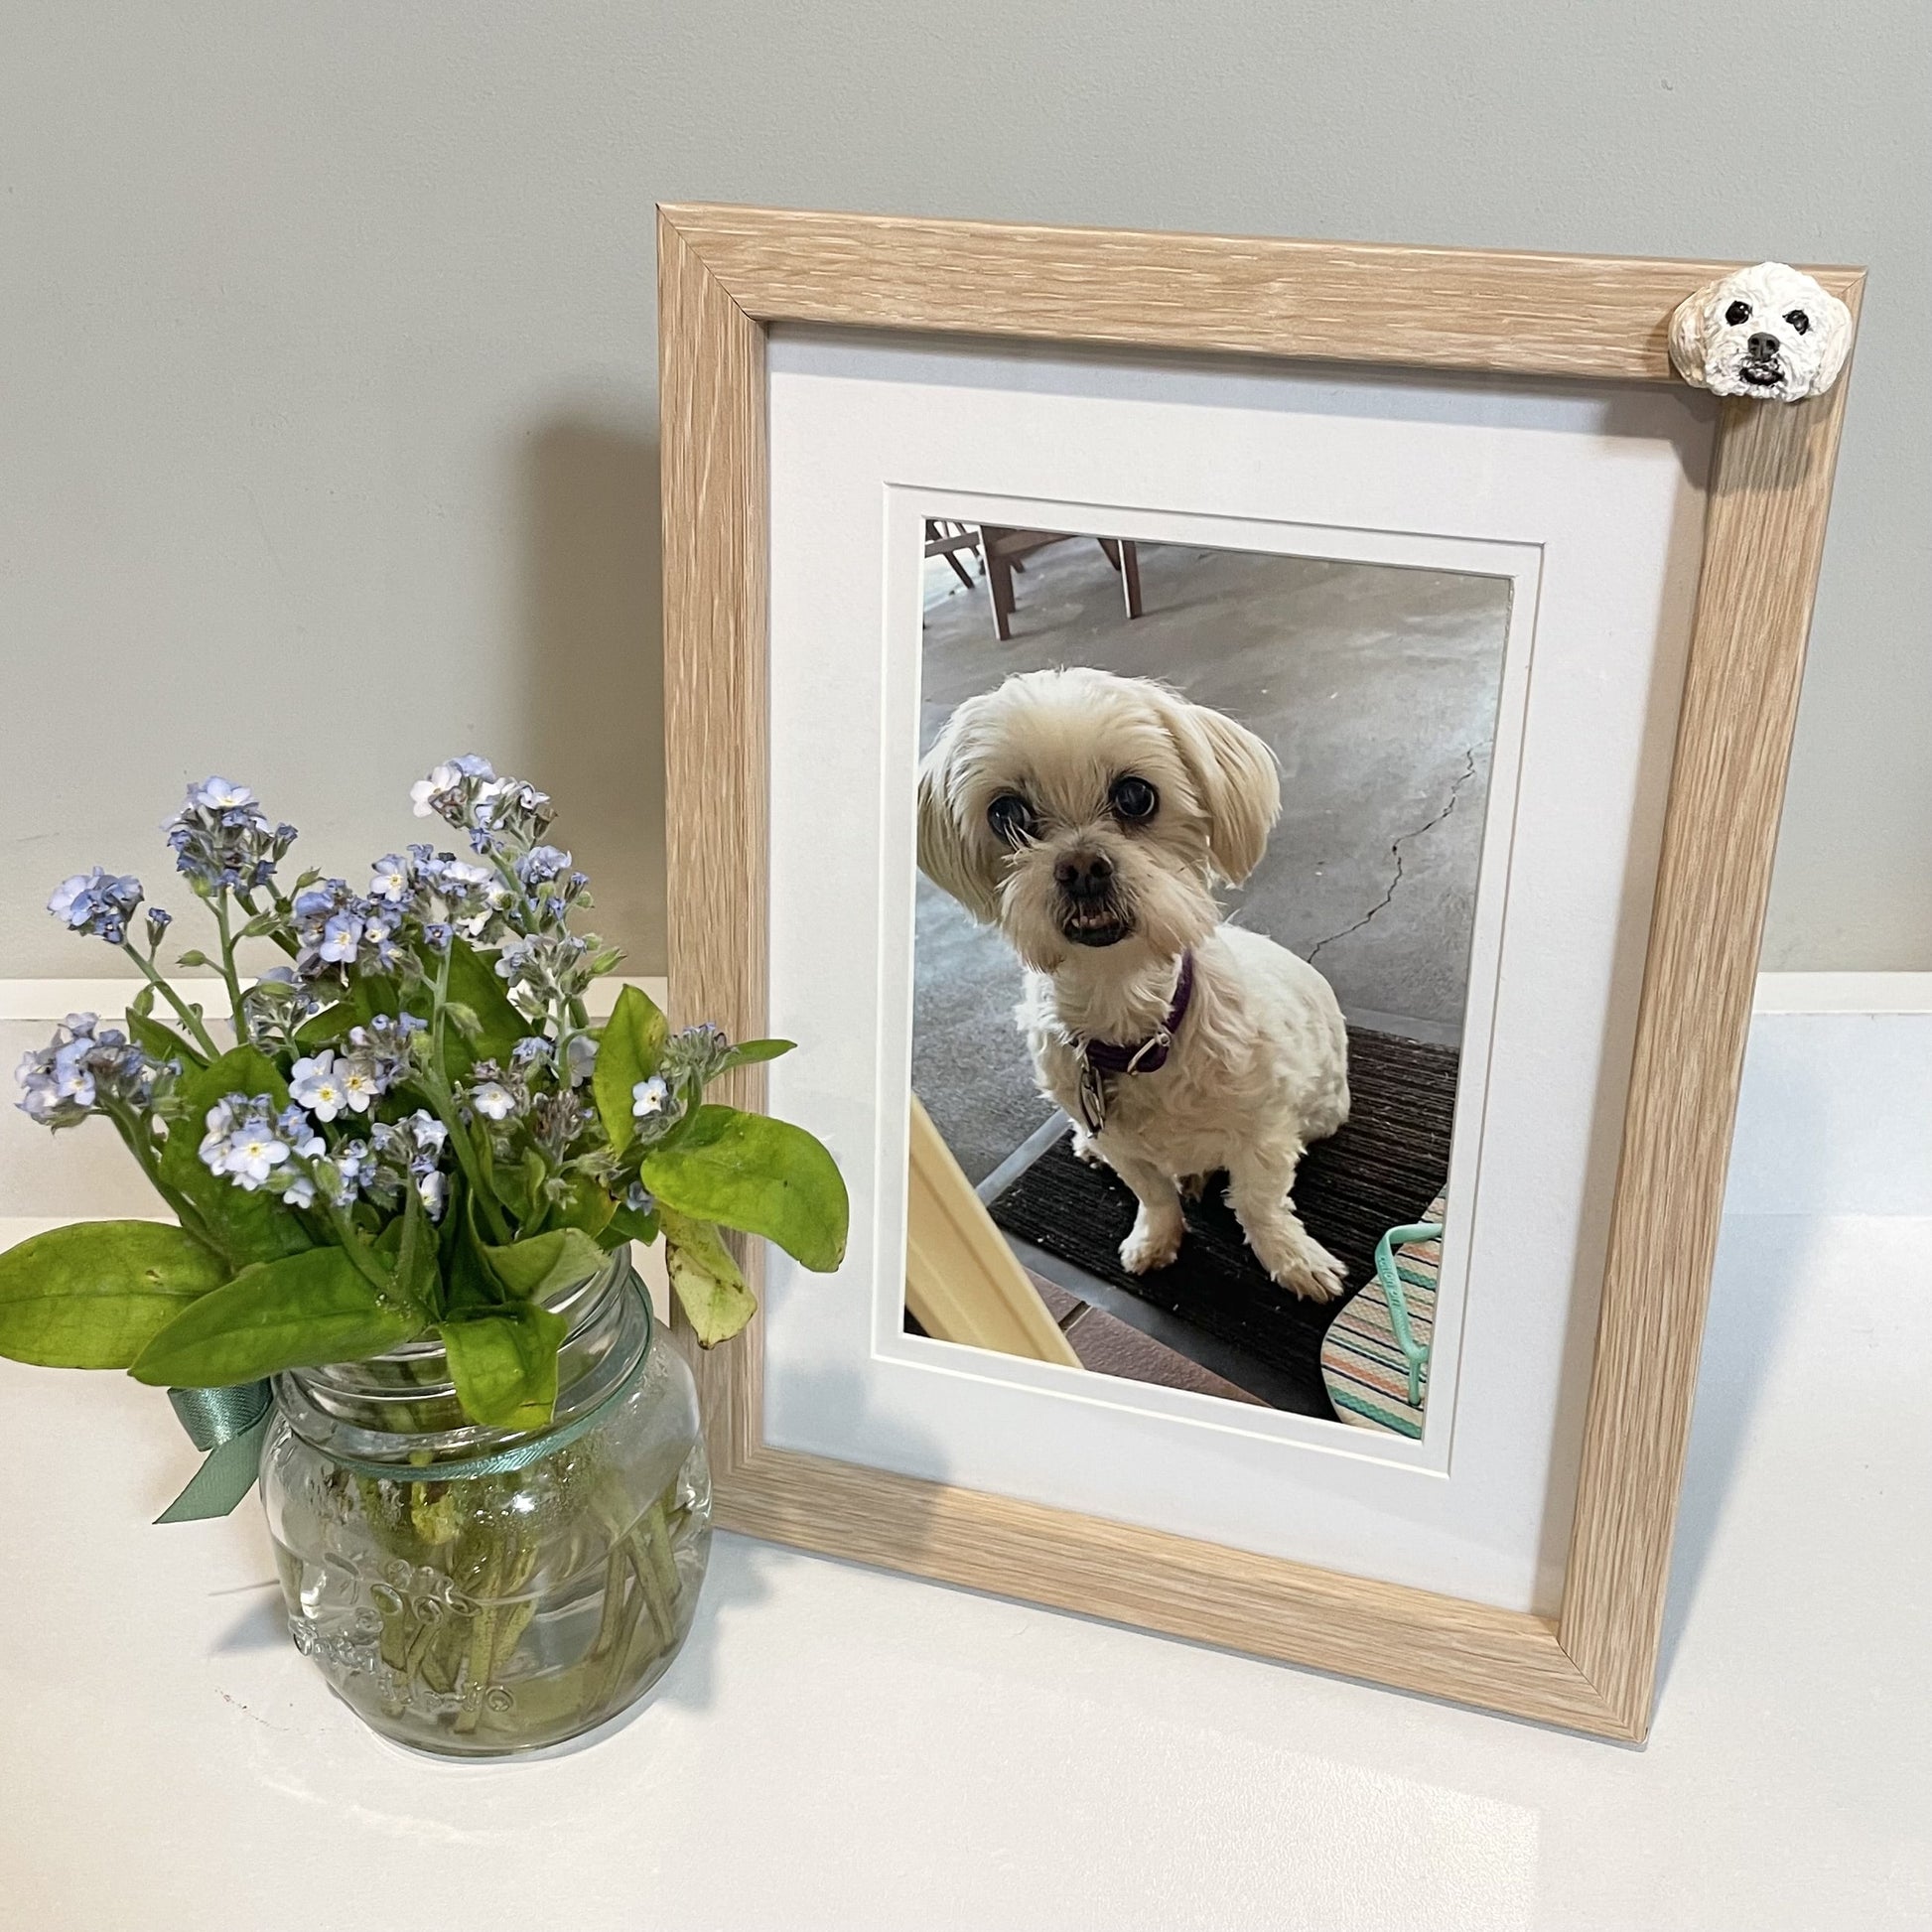 Custom handmade pet photo frames, both in oak colour with a white dog's face.